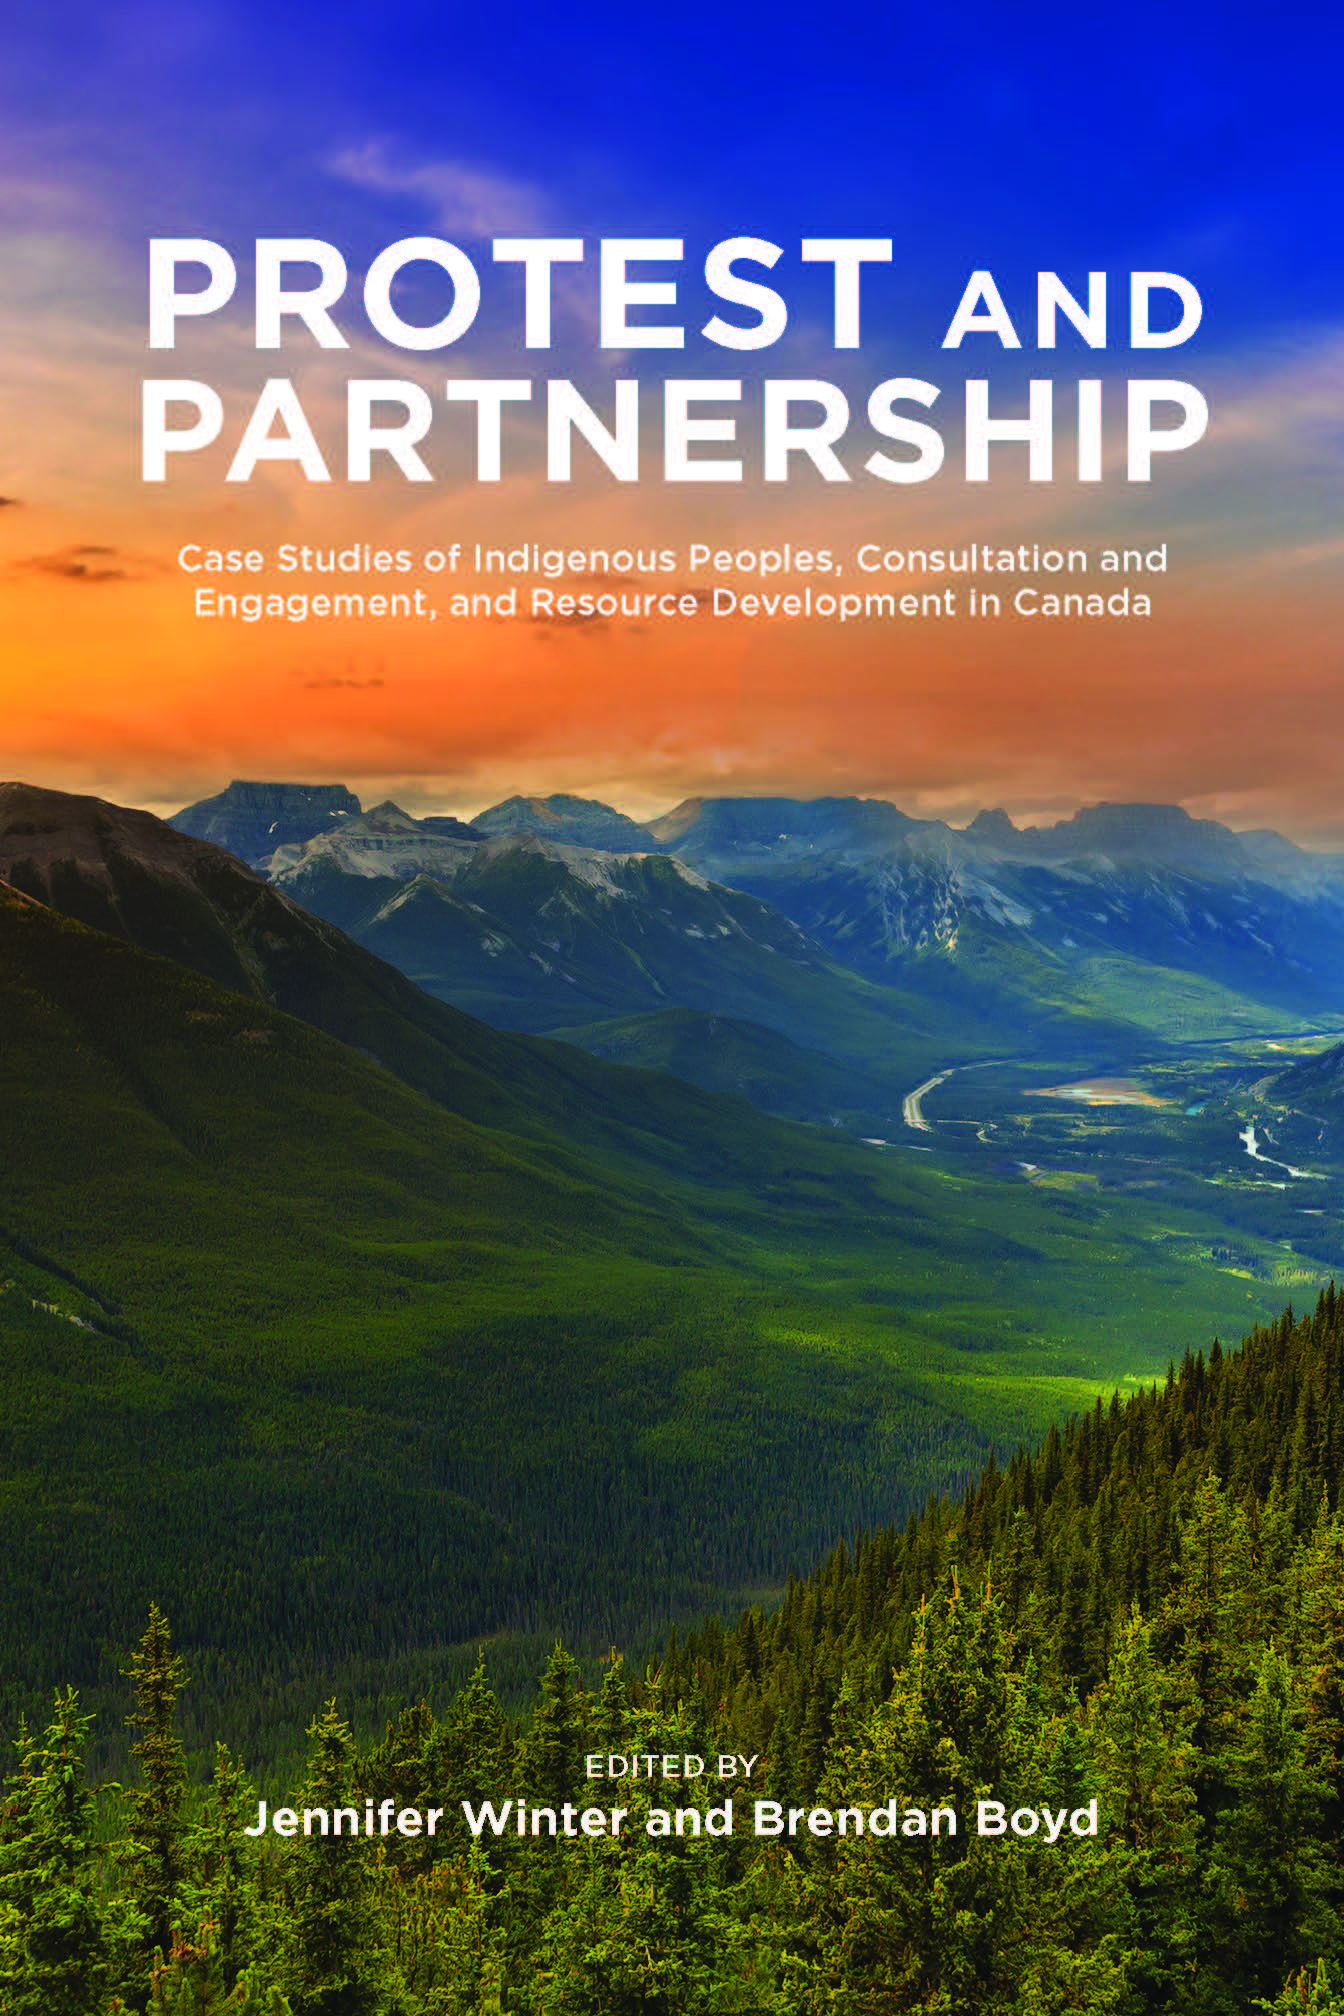 Cover Image for: Protest and Partnership